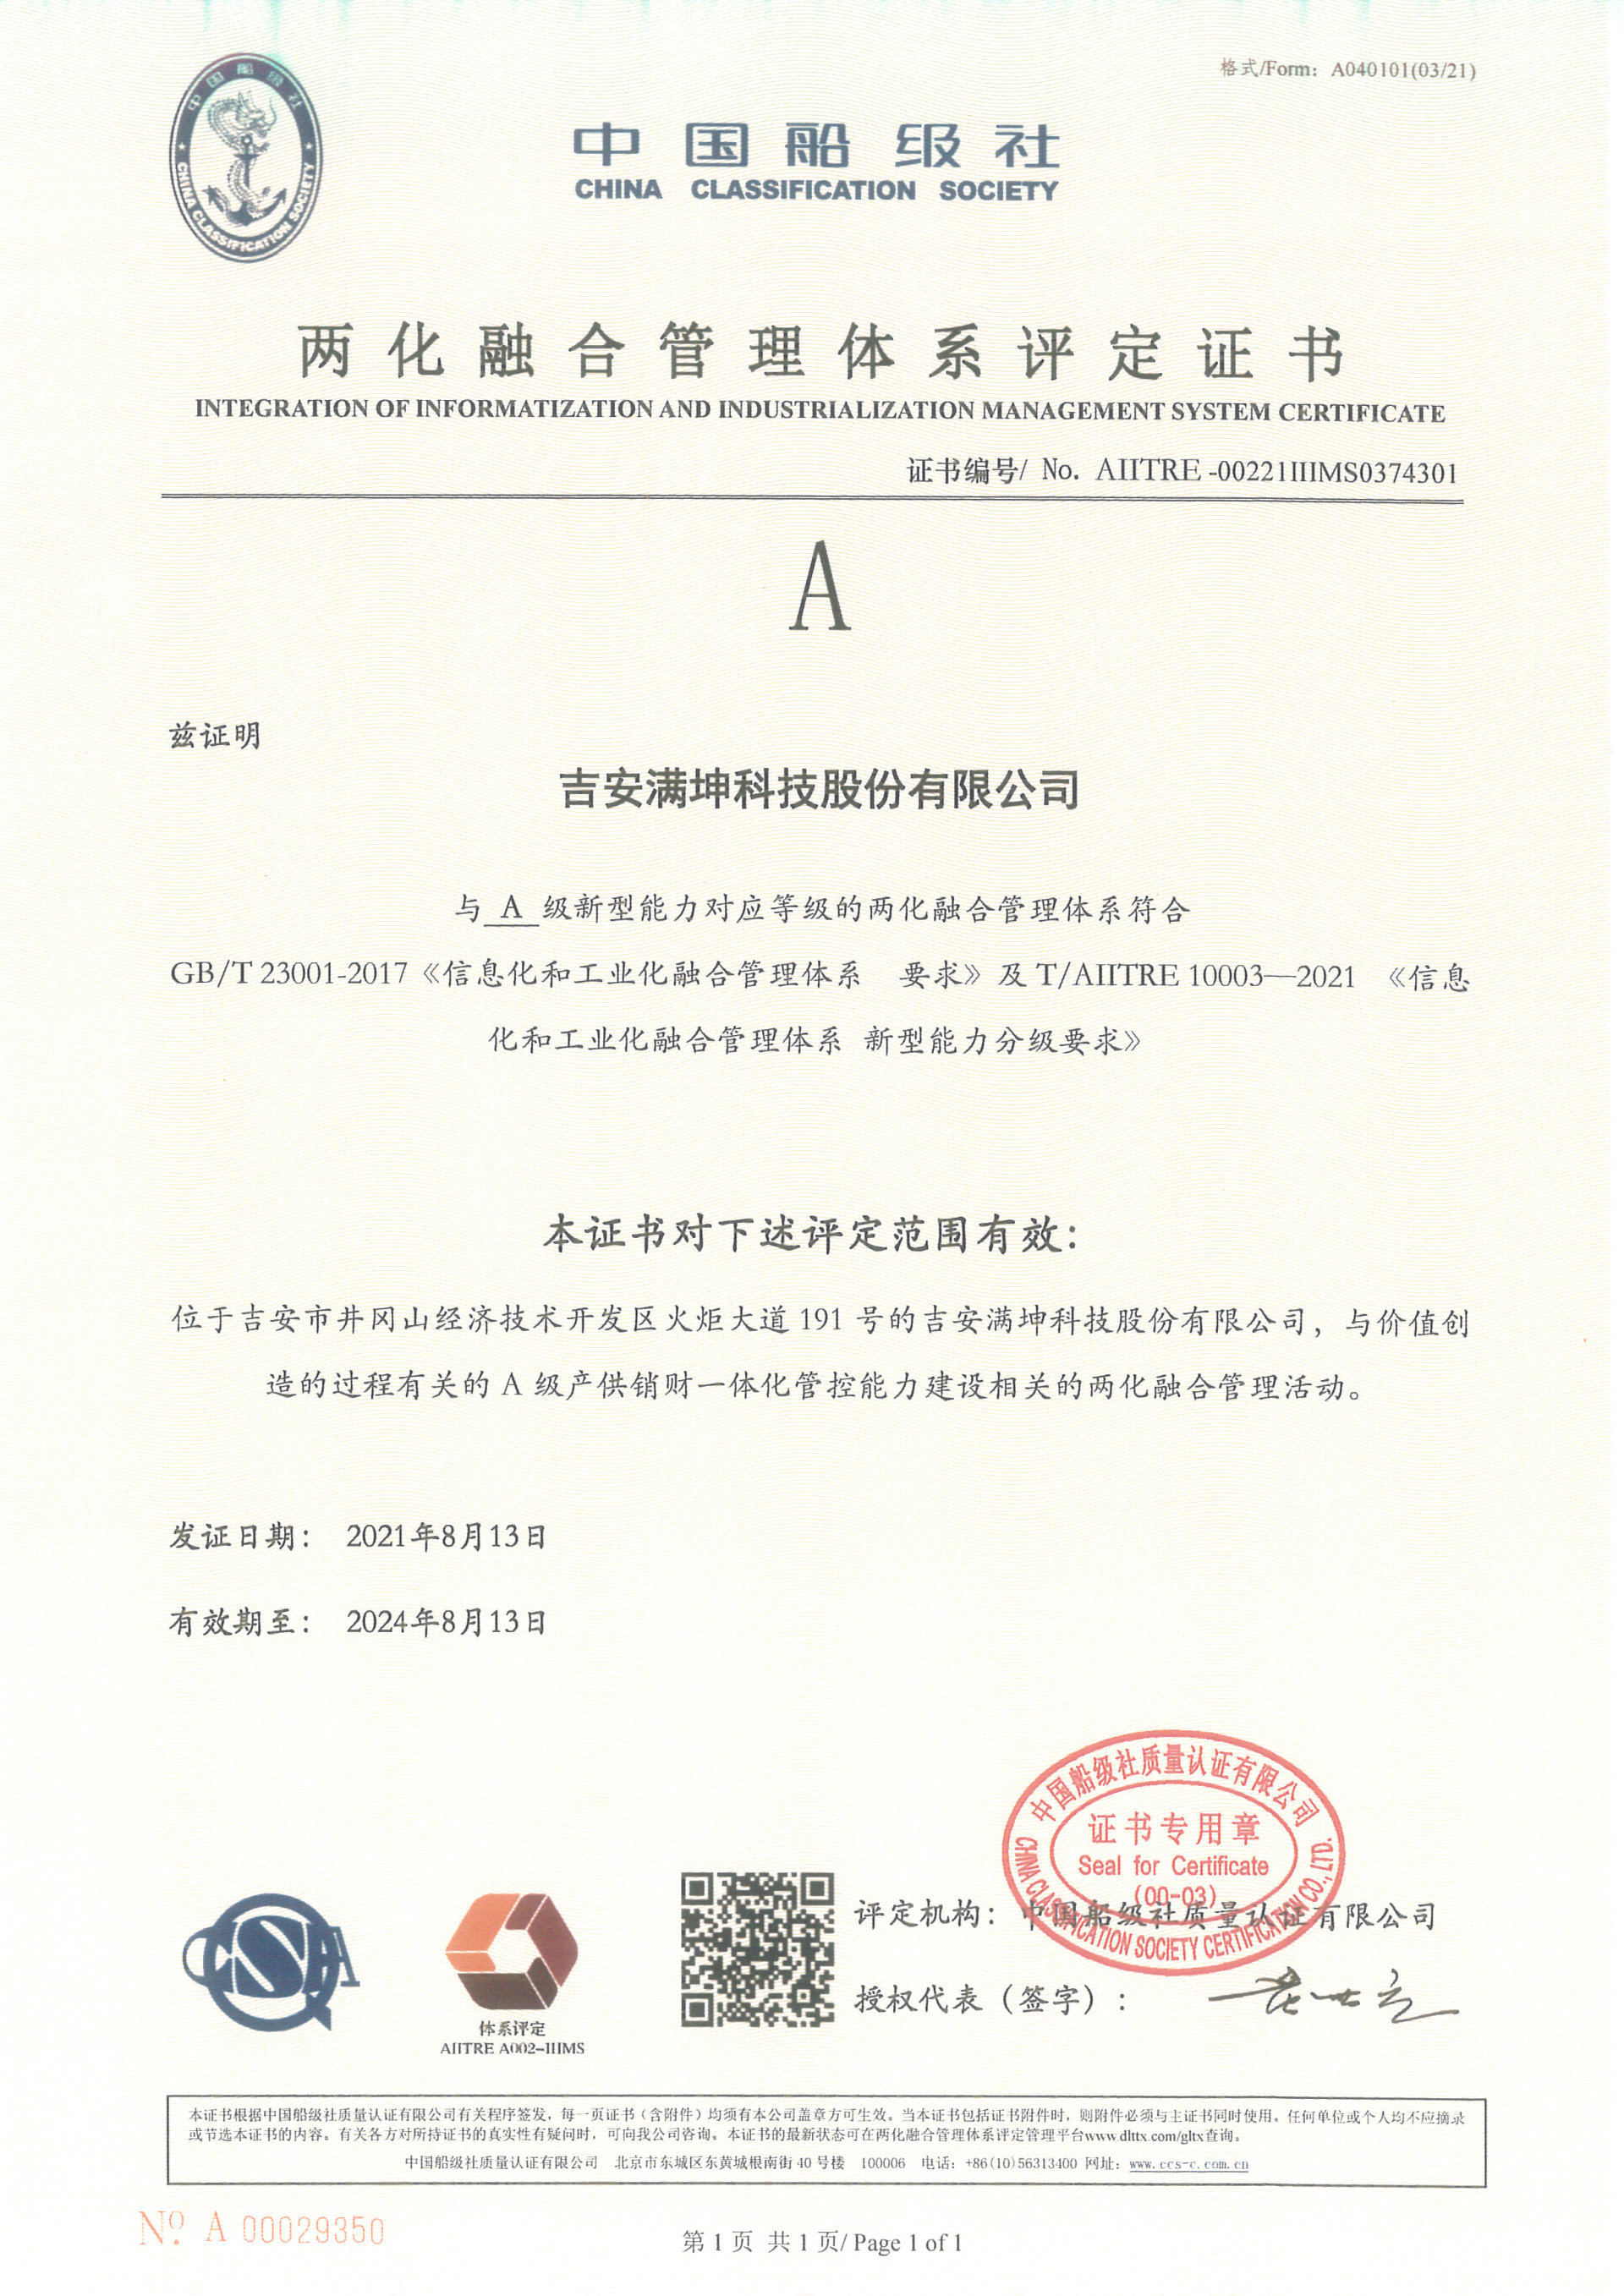 Certificate of Informatization and Industrialization Integration Management System